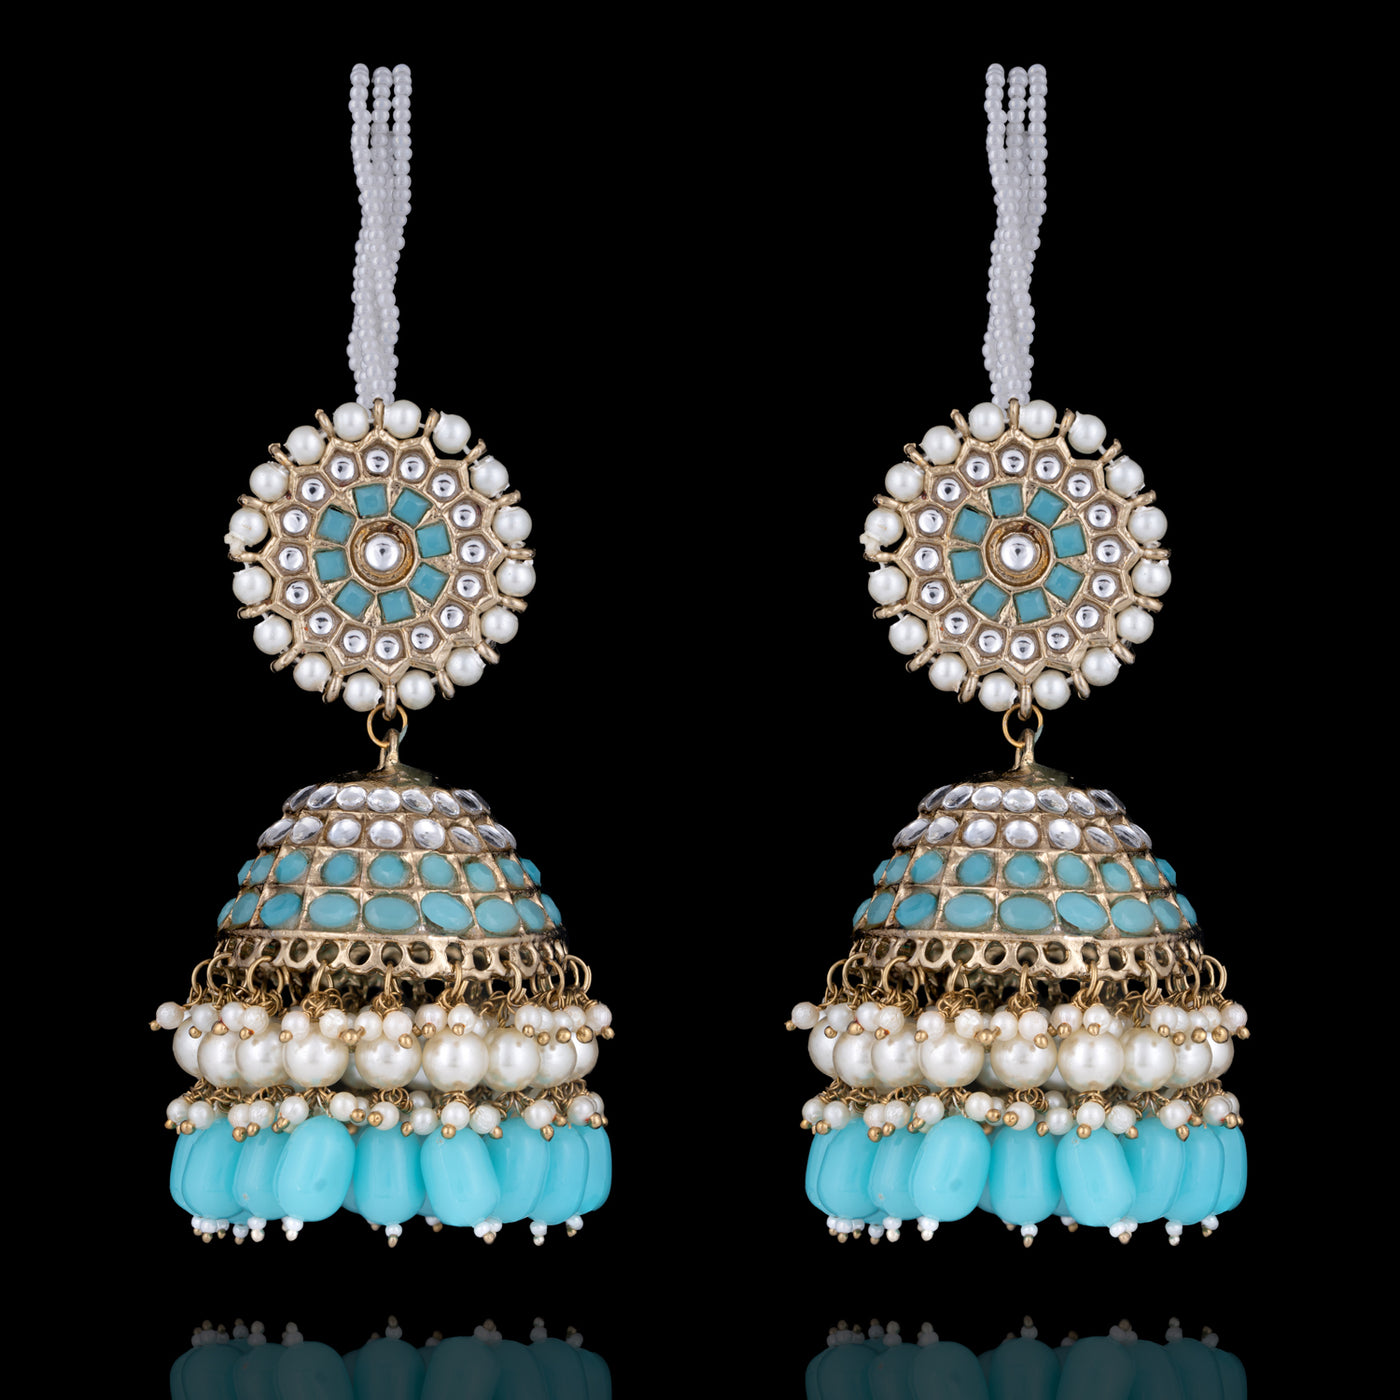 Ananya Earrings - Available in 2 Colors